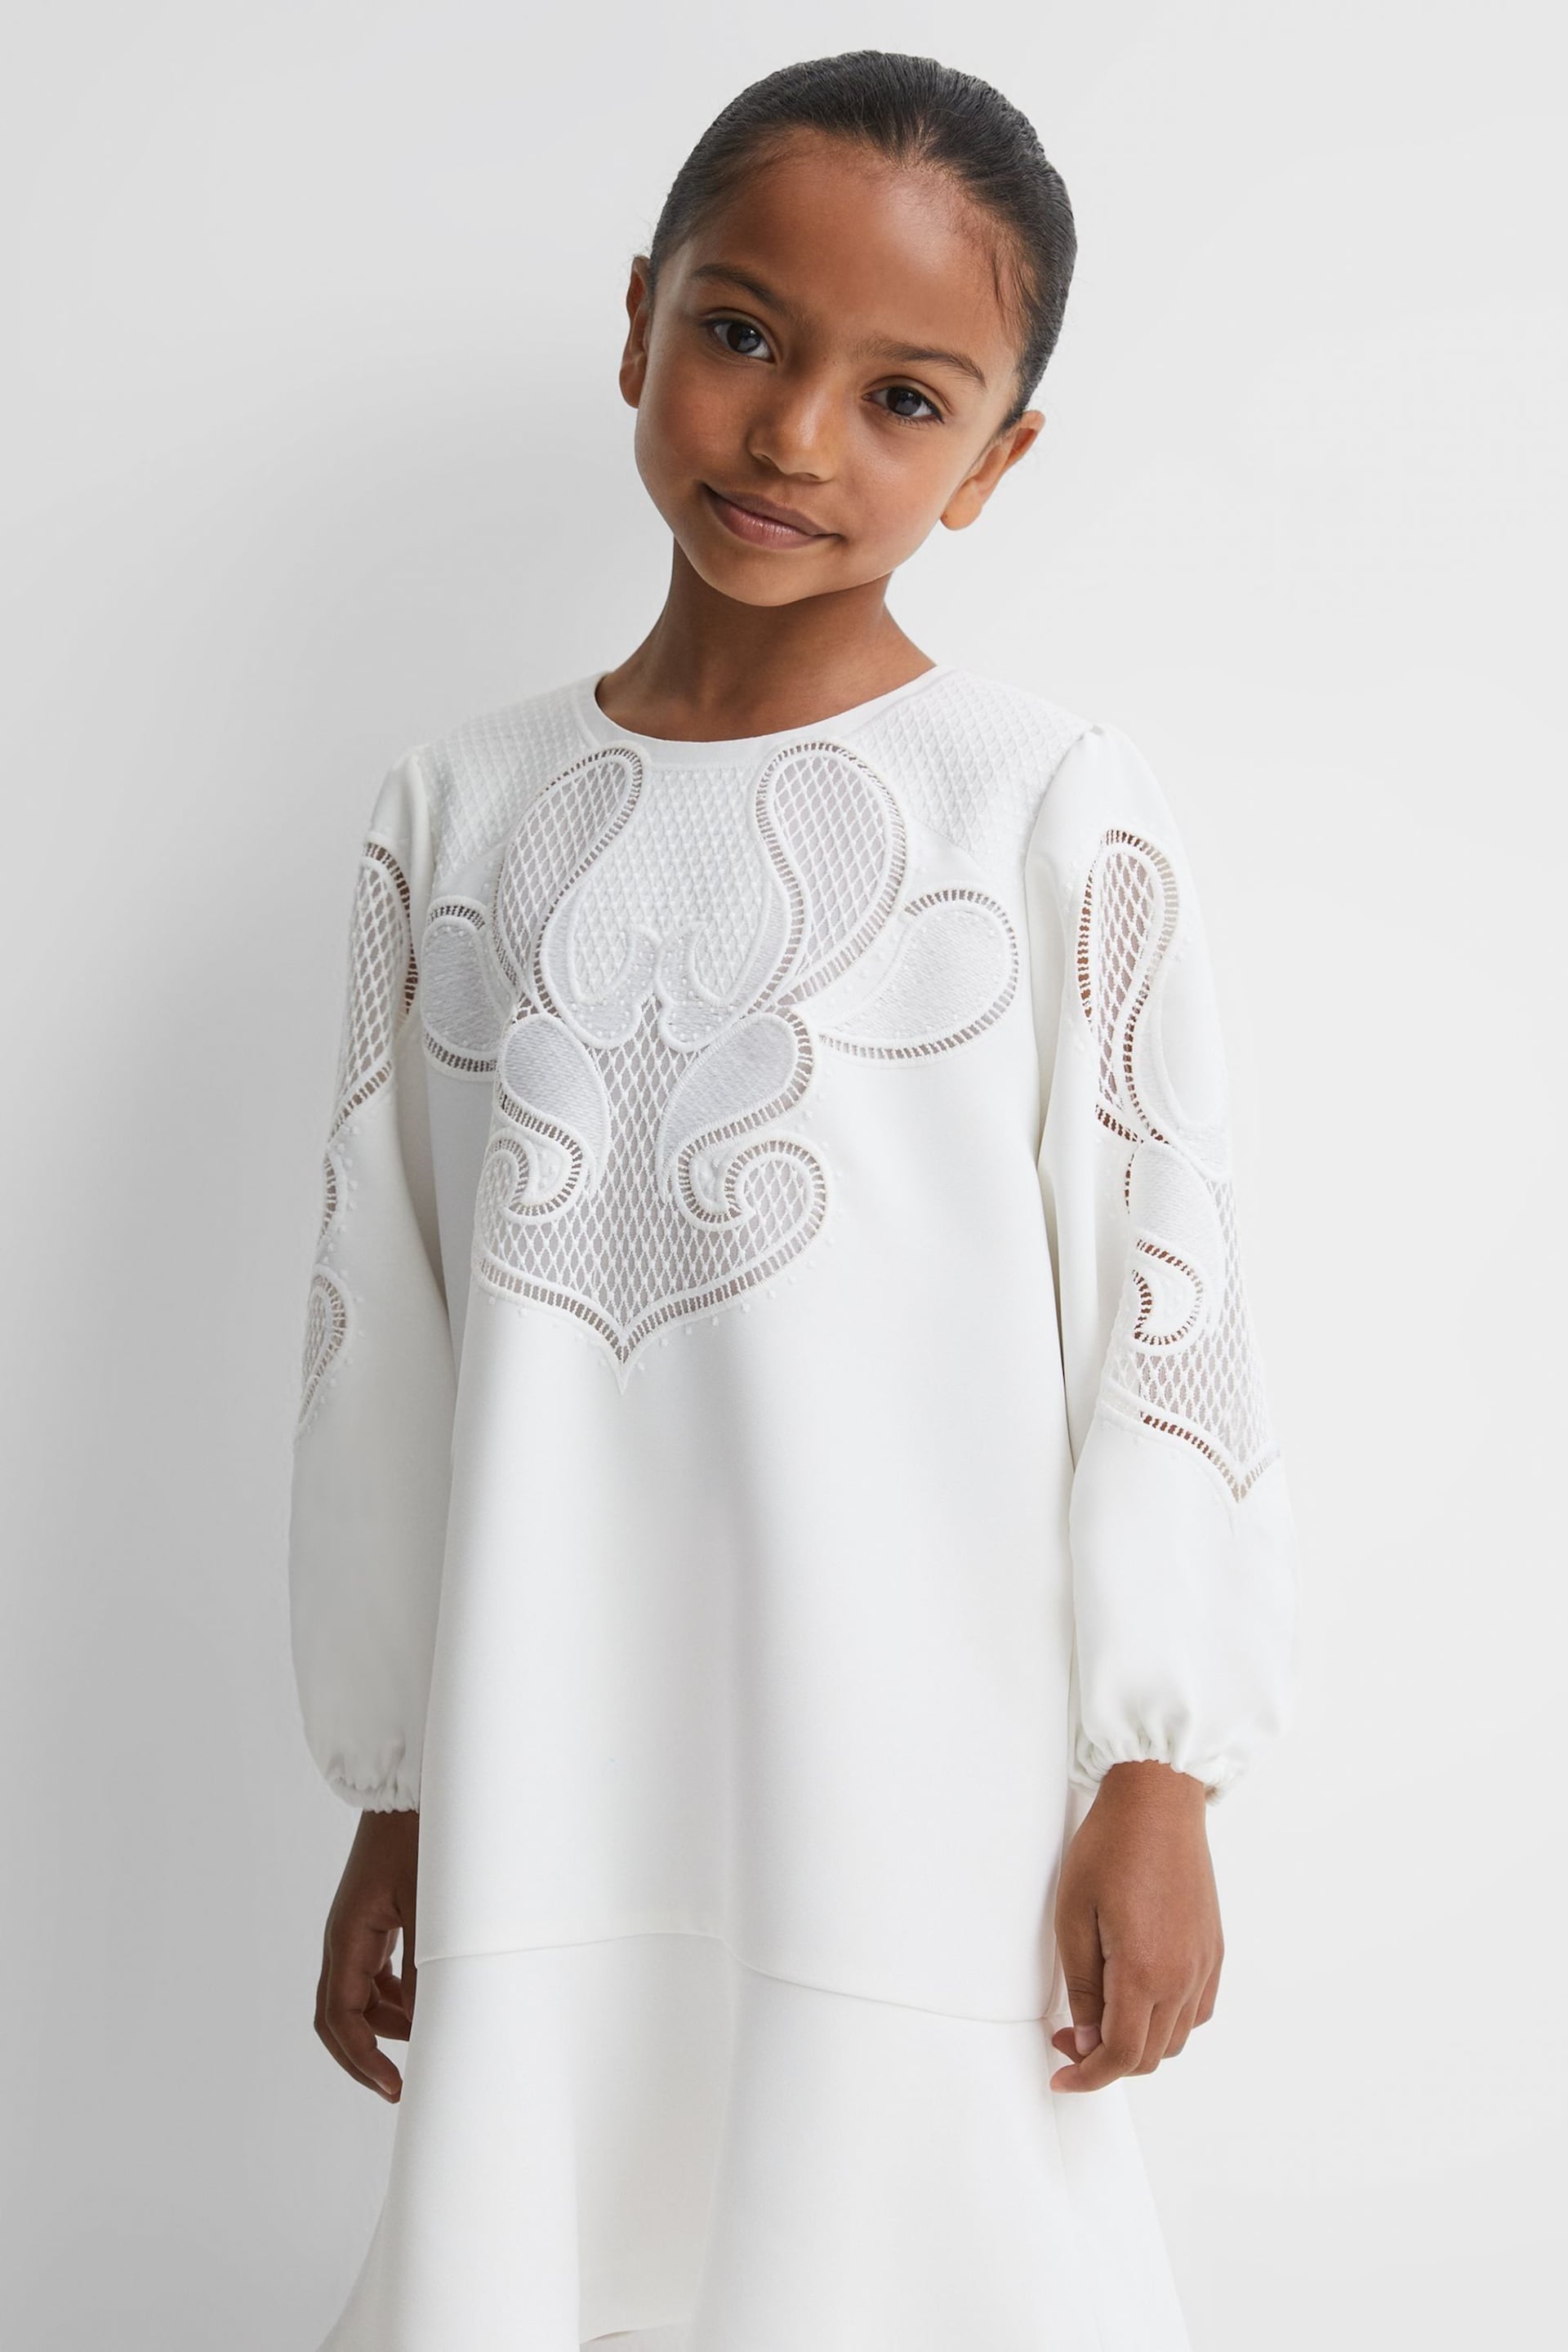 Reiss Ivory Toya Senior Floral Embroidered Dress - Image 1 of 7